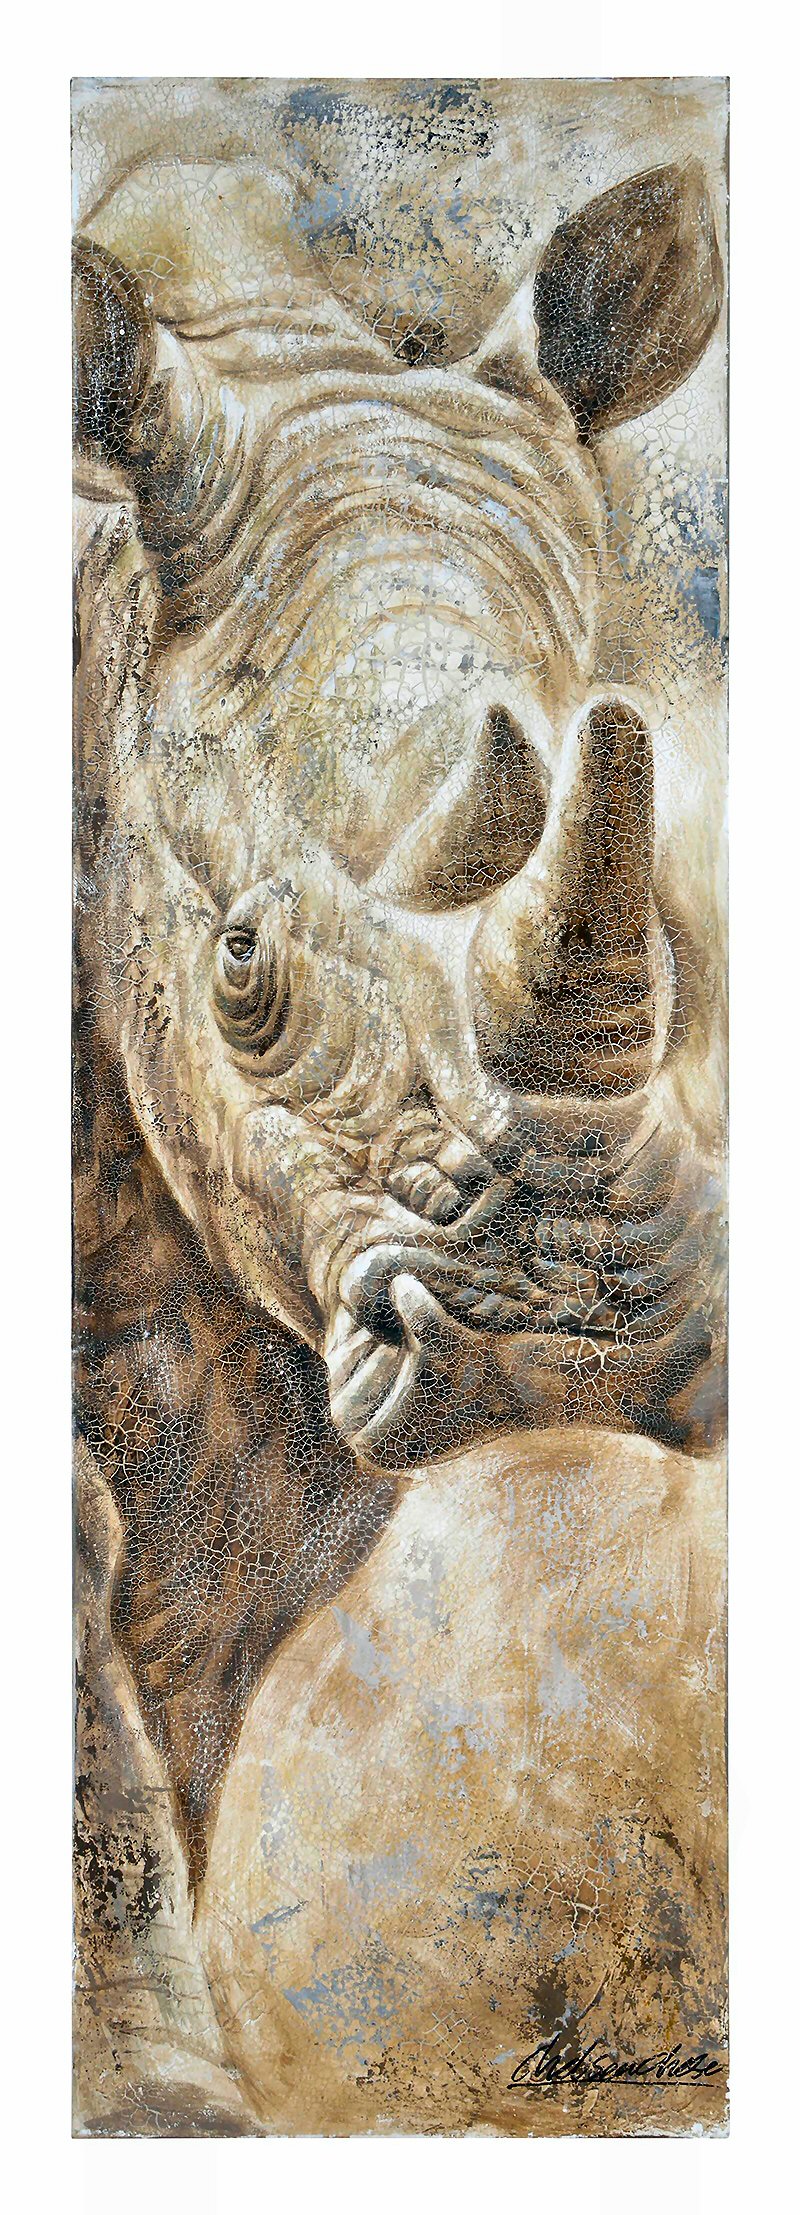 “Renosters” Hand-Painted Canvas in Support of The Rhino Orphanage